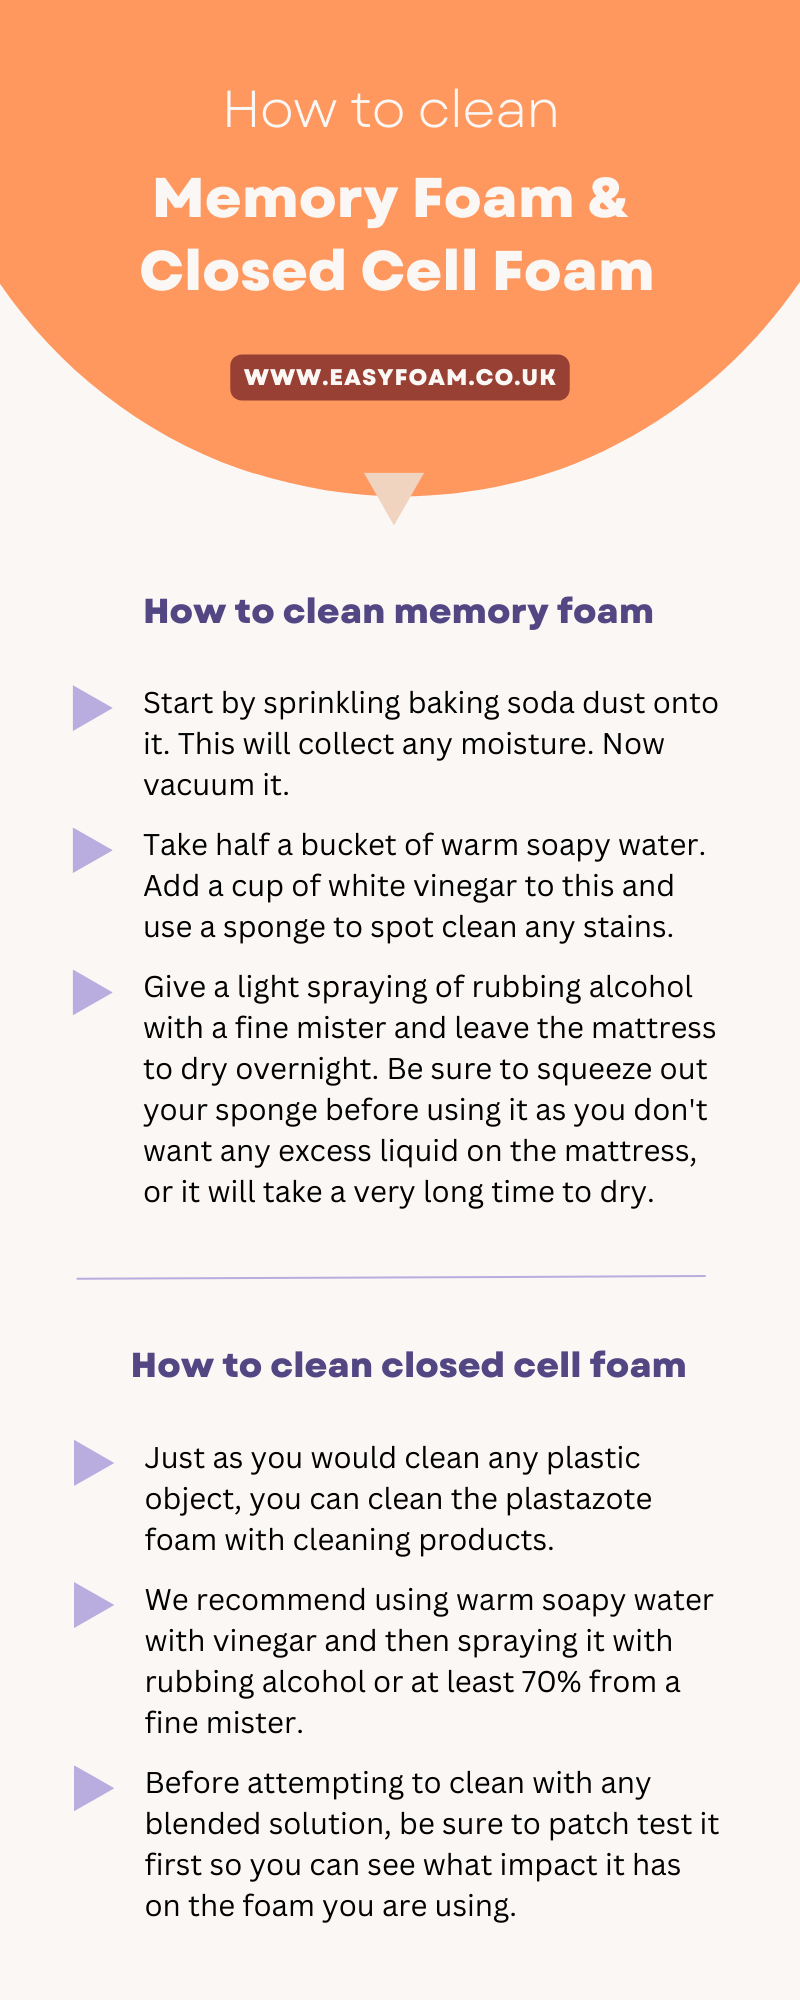 How To Clean Foam Infographic